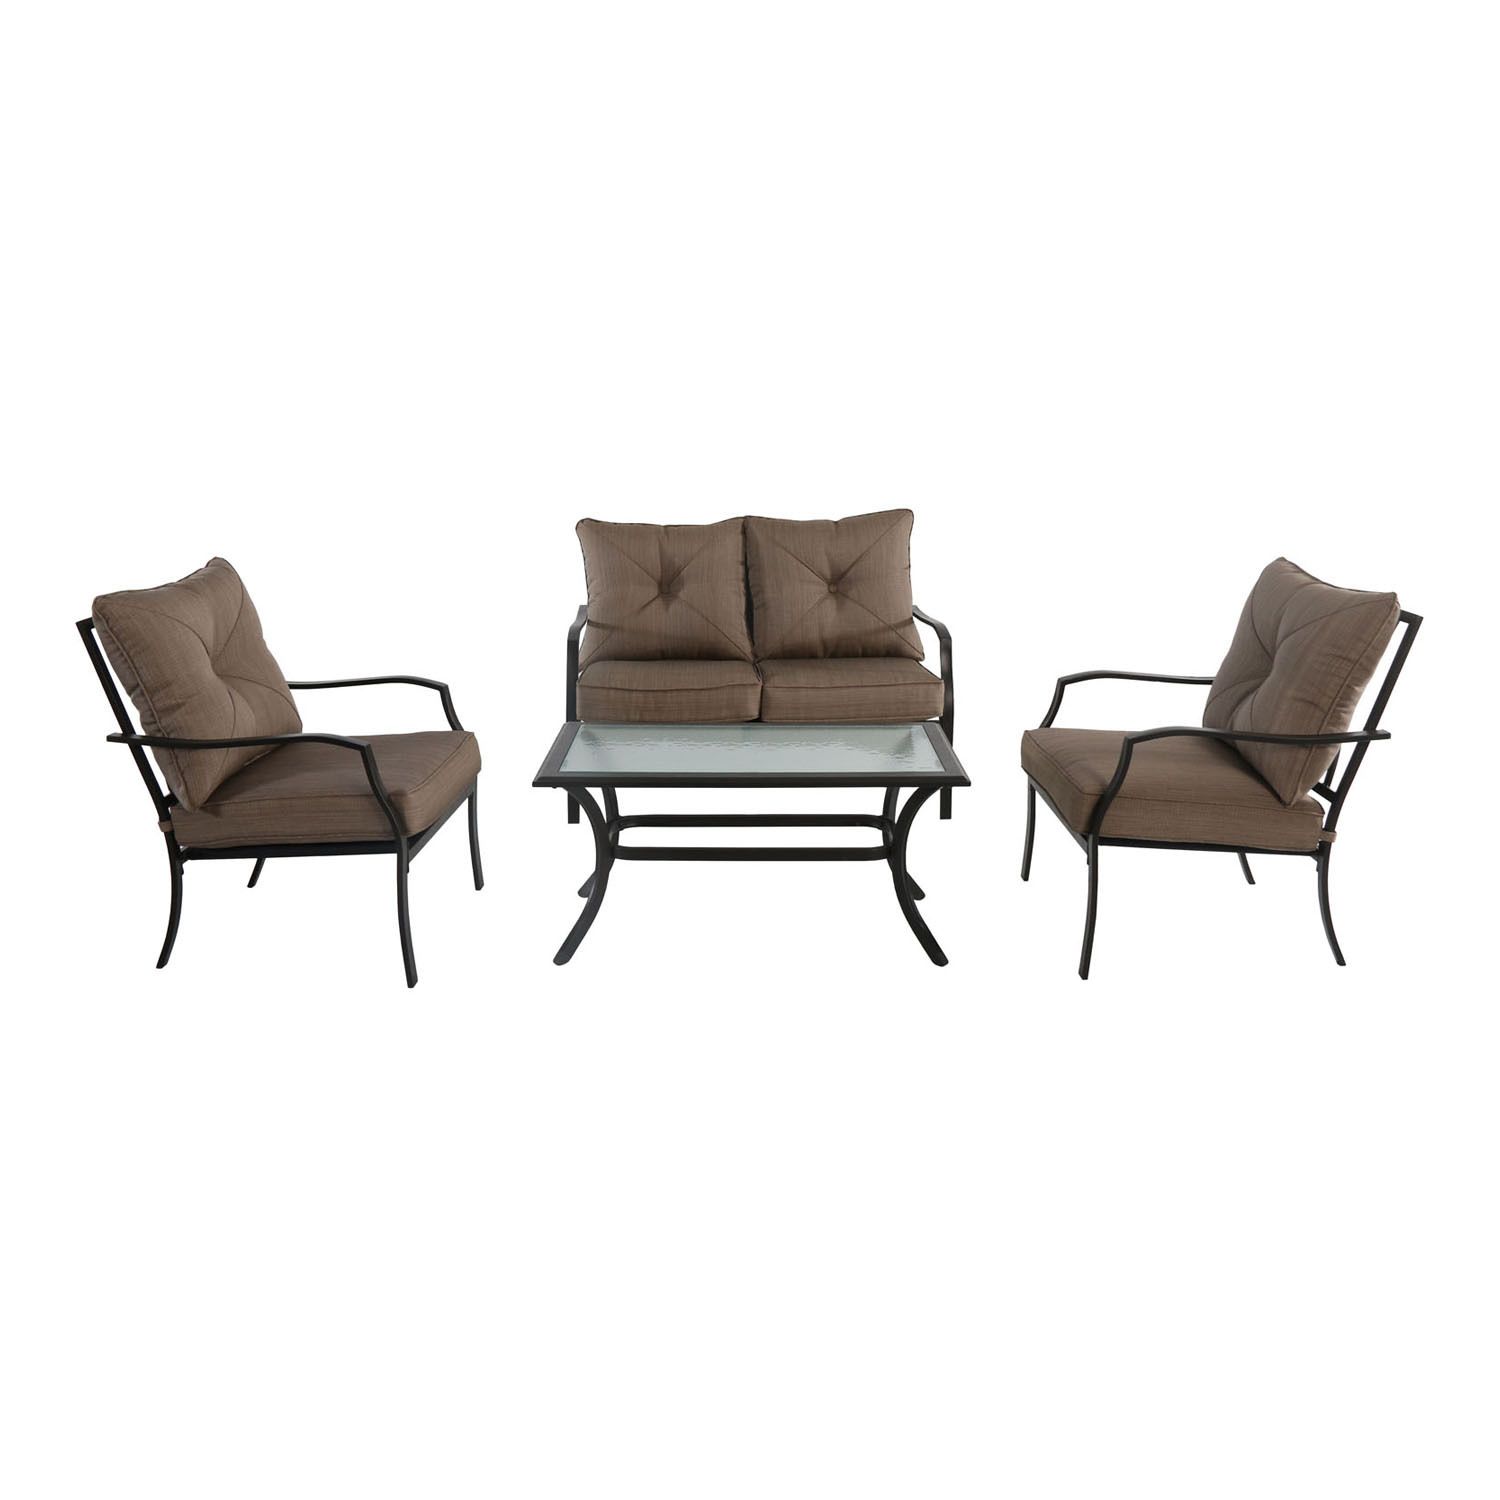 Image for Hanover Accessories Palm Bay Patio 4-piece Set at Kohl's.